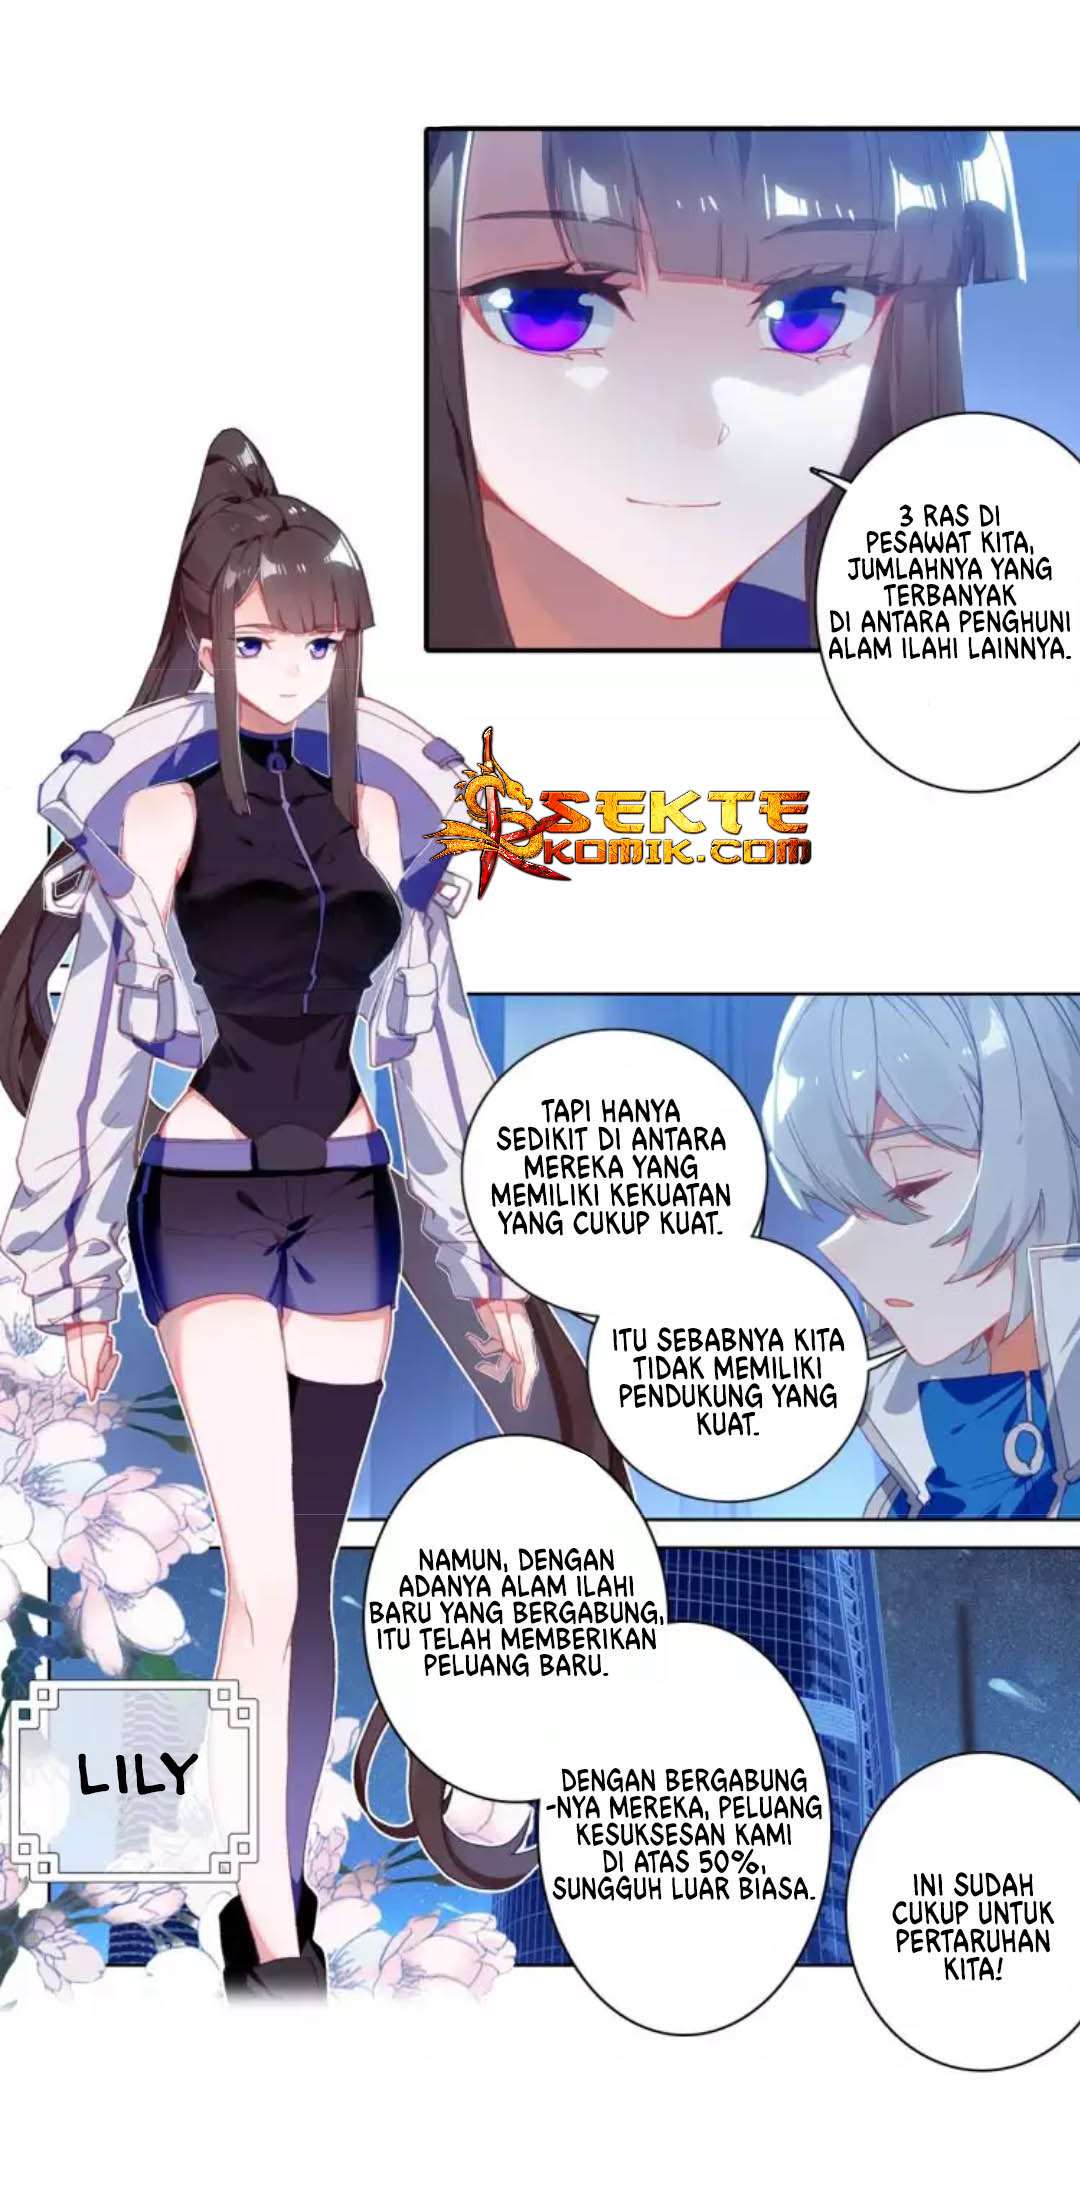 Soul Land Legend of the Tang’s Hero Chapter 9